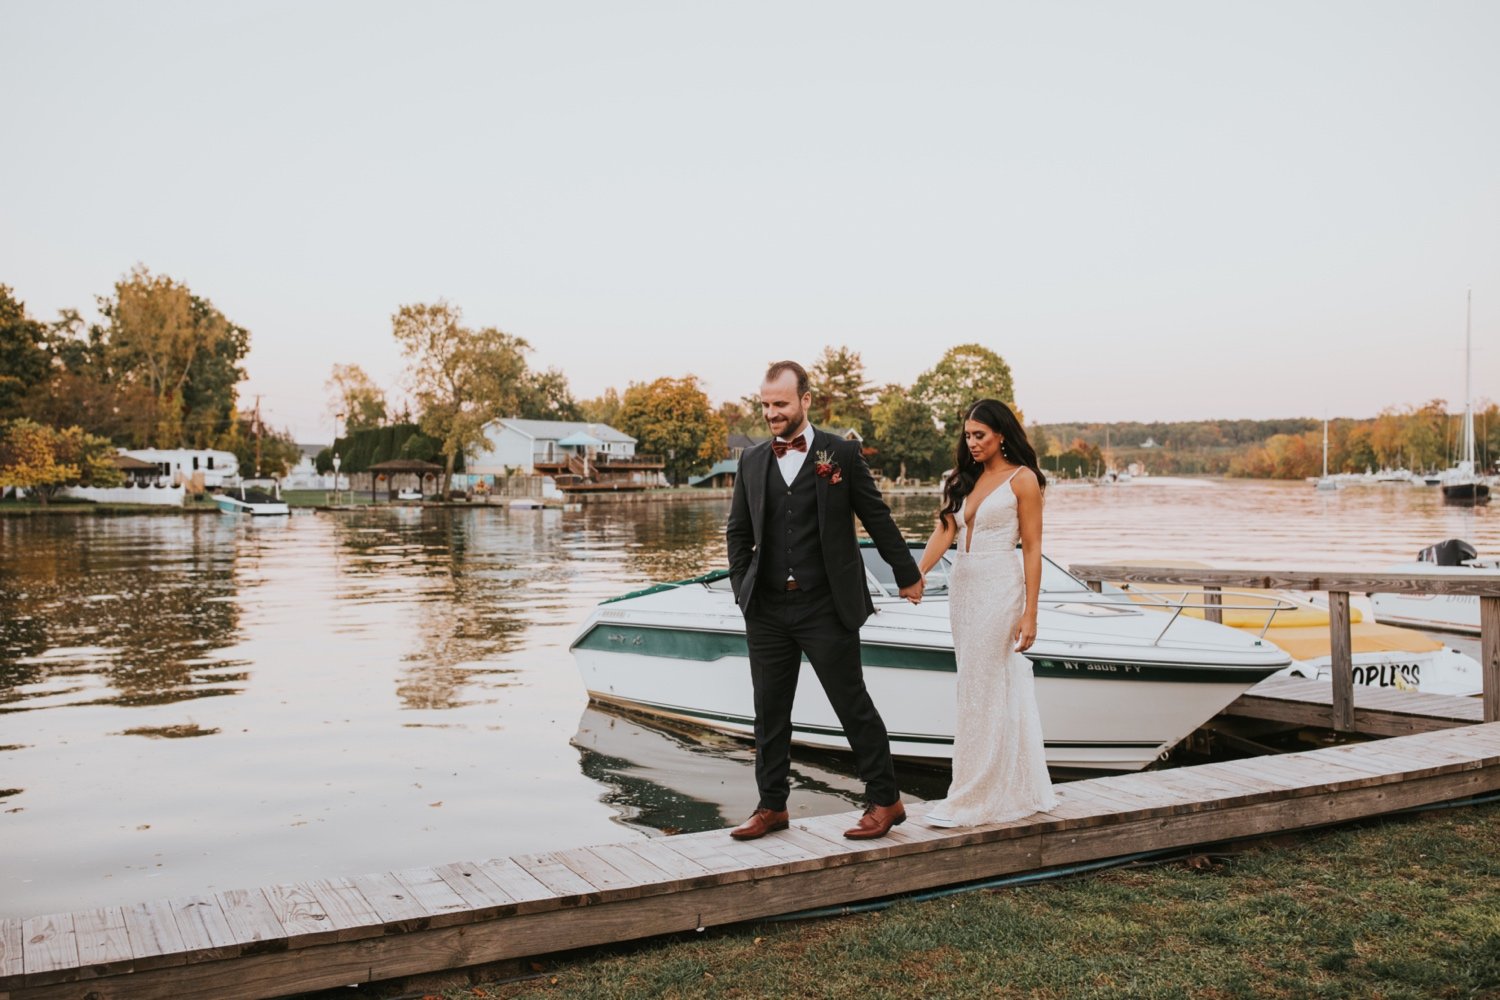 Hudson Valley Wedding, Hudson Valley Wedding Photographer, New York Wedding, New York Wedding Photographer, Saugerties Steamboat Company, Saugerties Steamboat Co